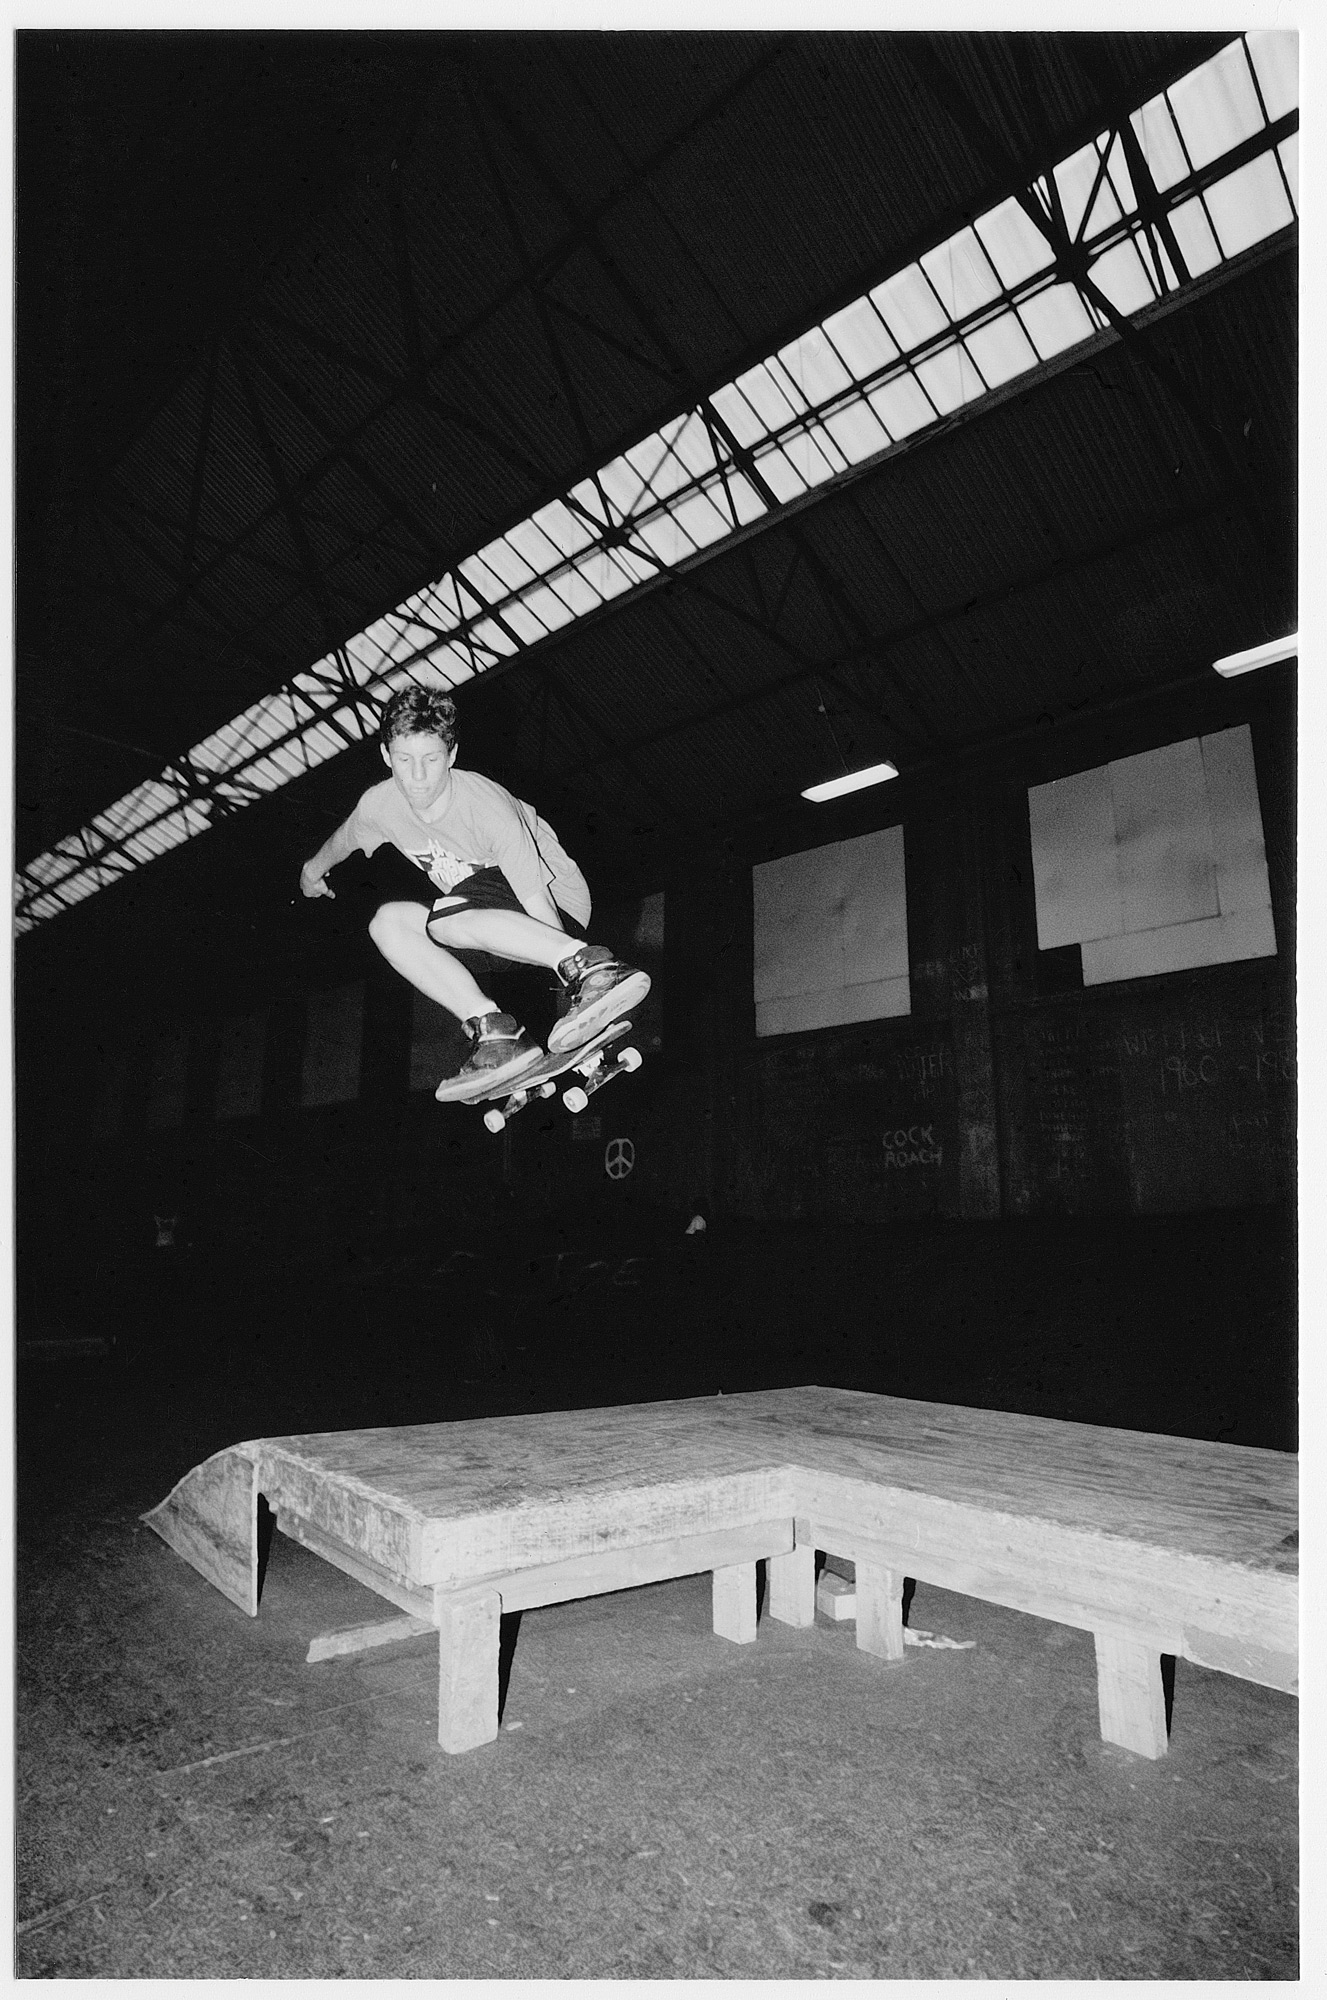 Chris Scott performing a ollie melon at The Skate Pit in Wellington, 1990.